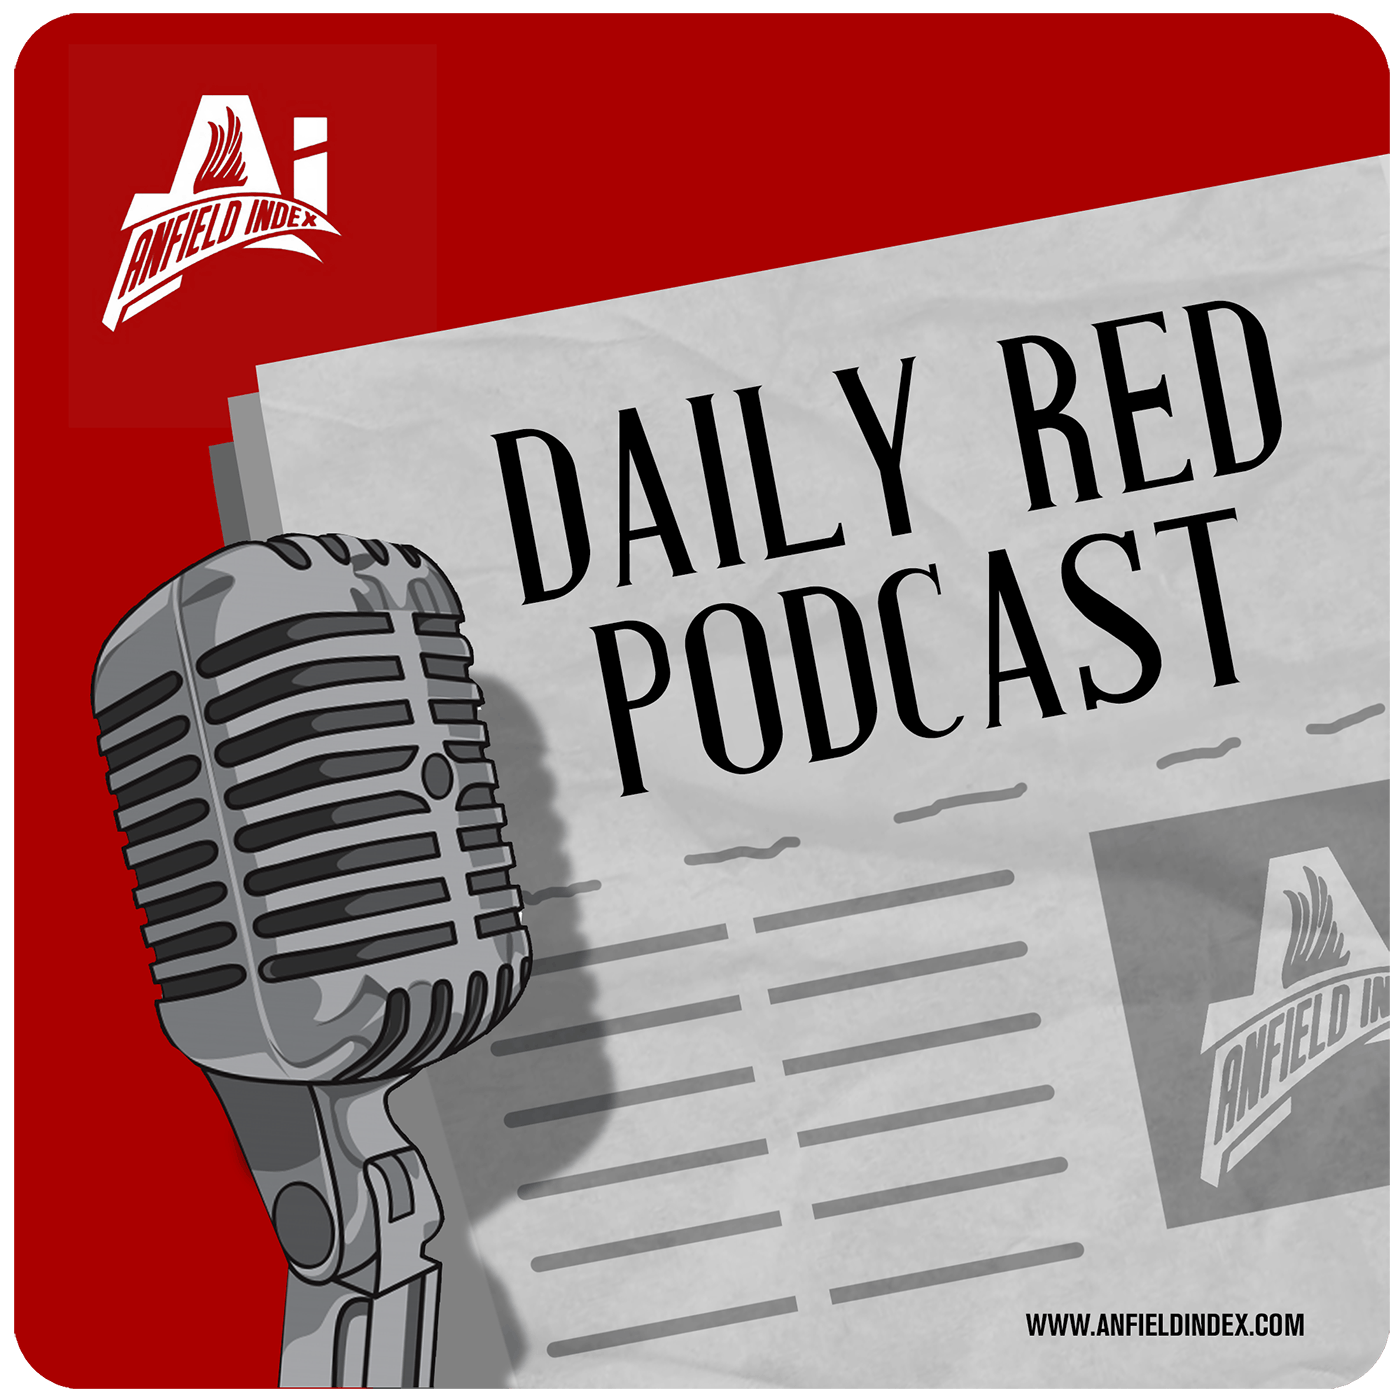 Forest Ahead - Daily Red Podcast